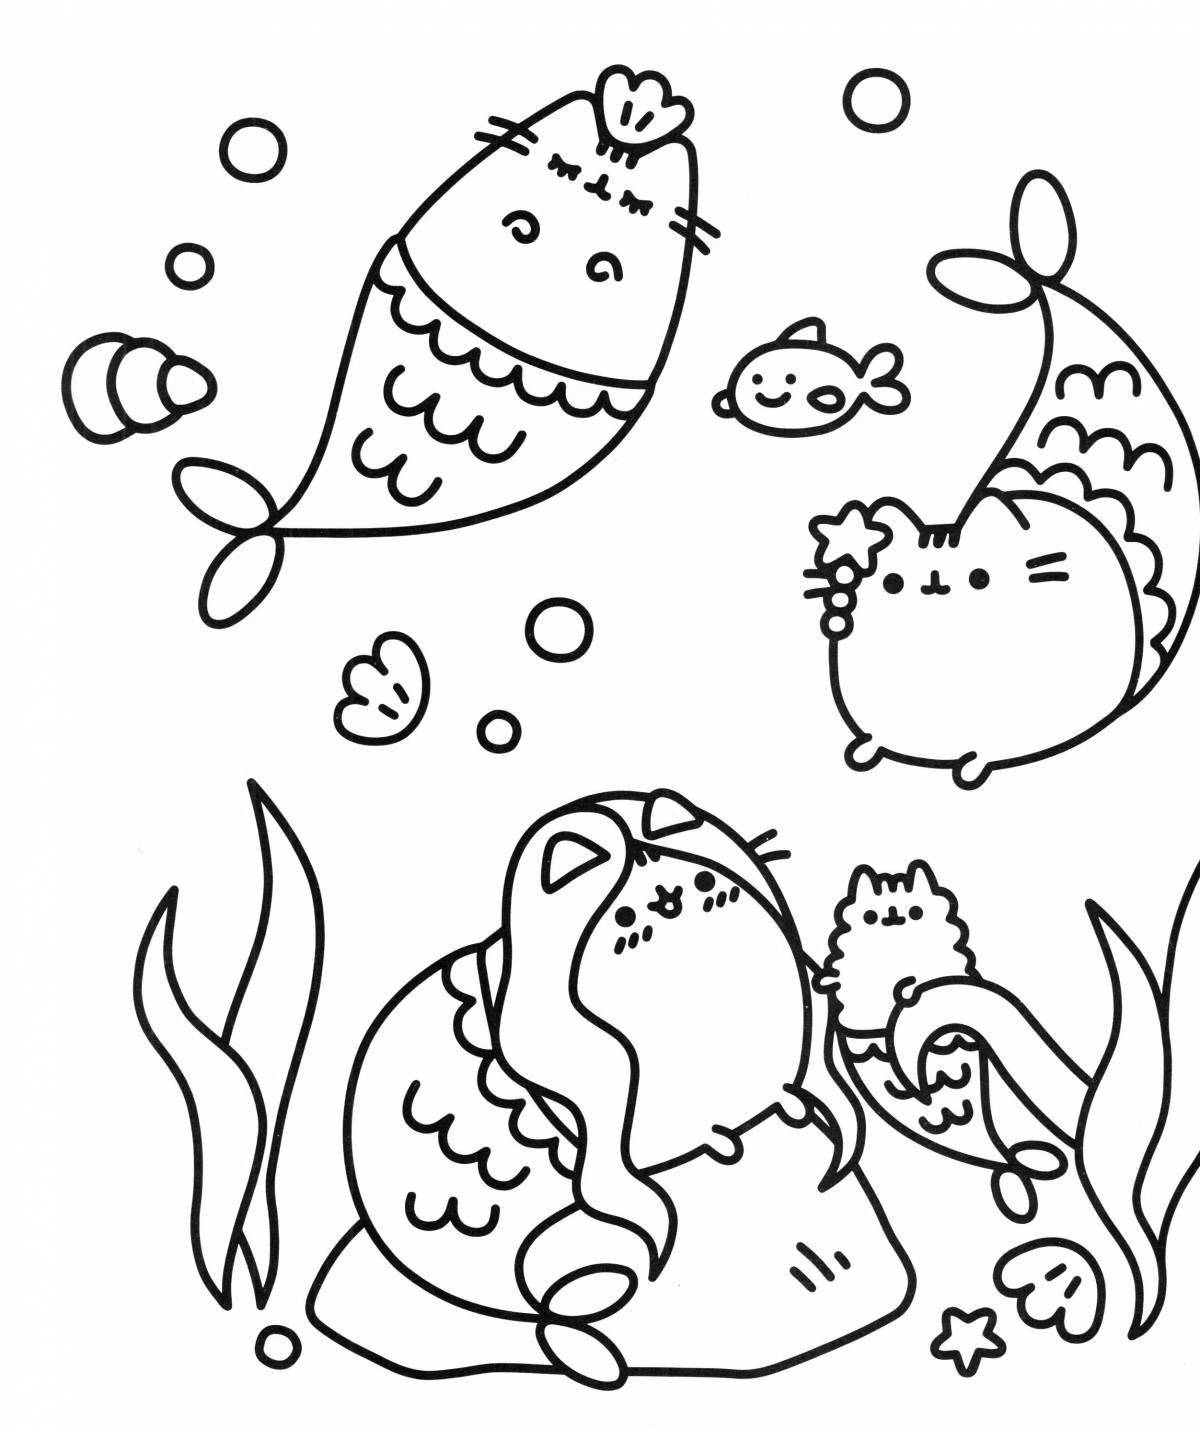 Coloring page sweet fluffy cat